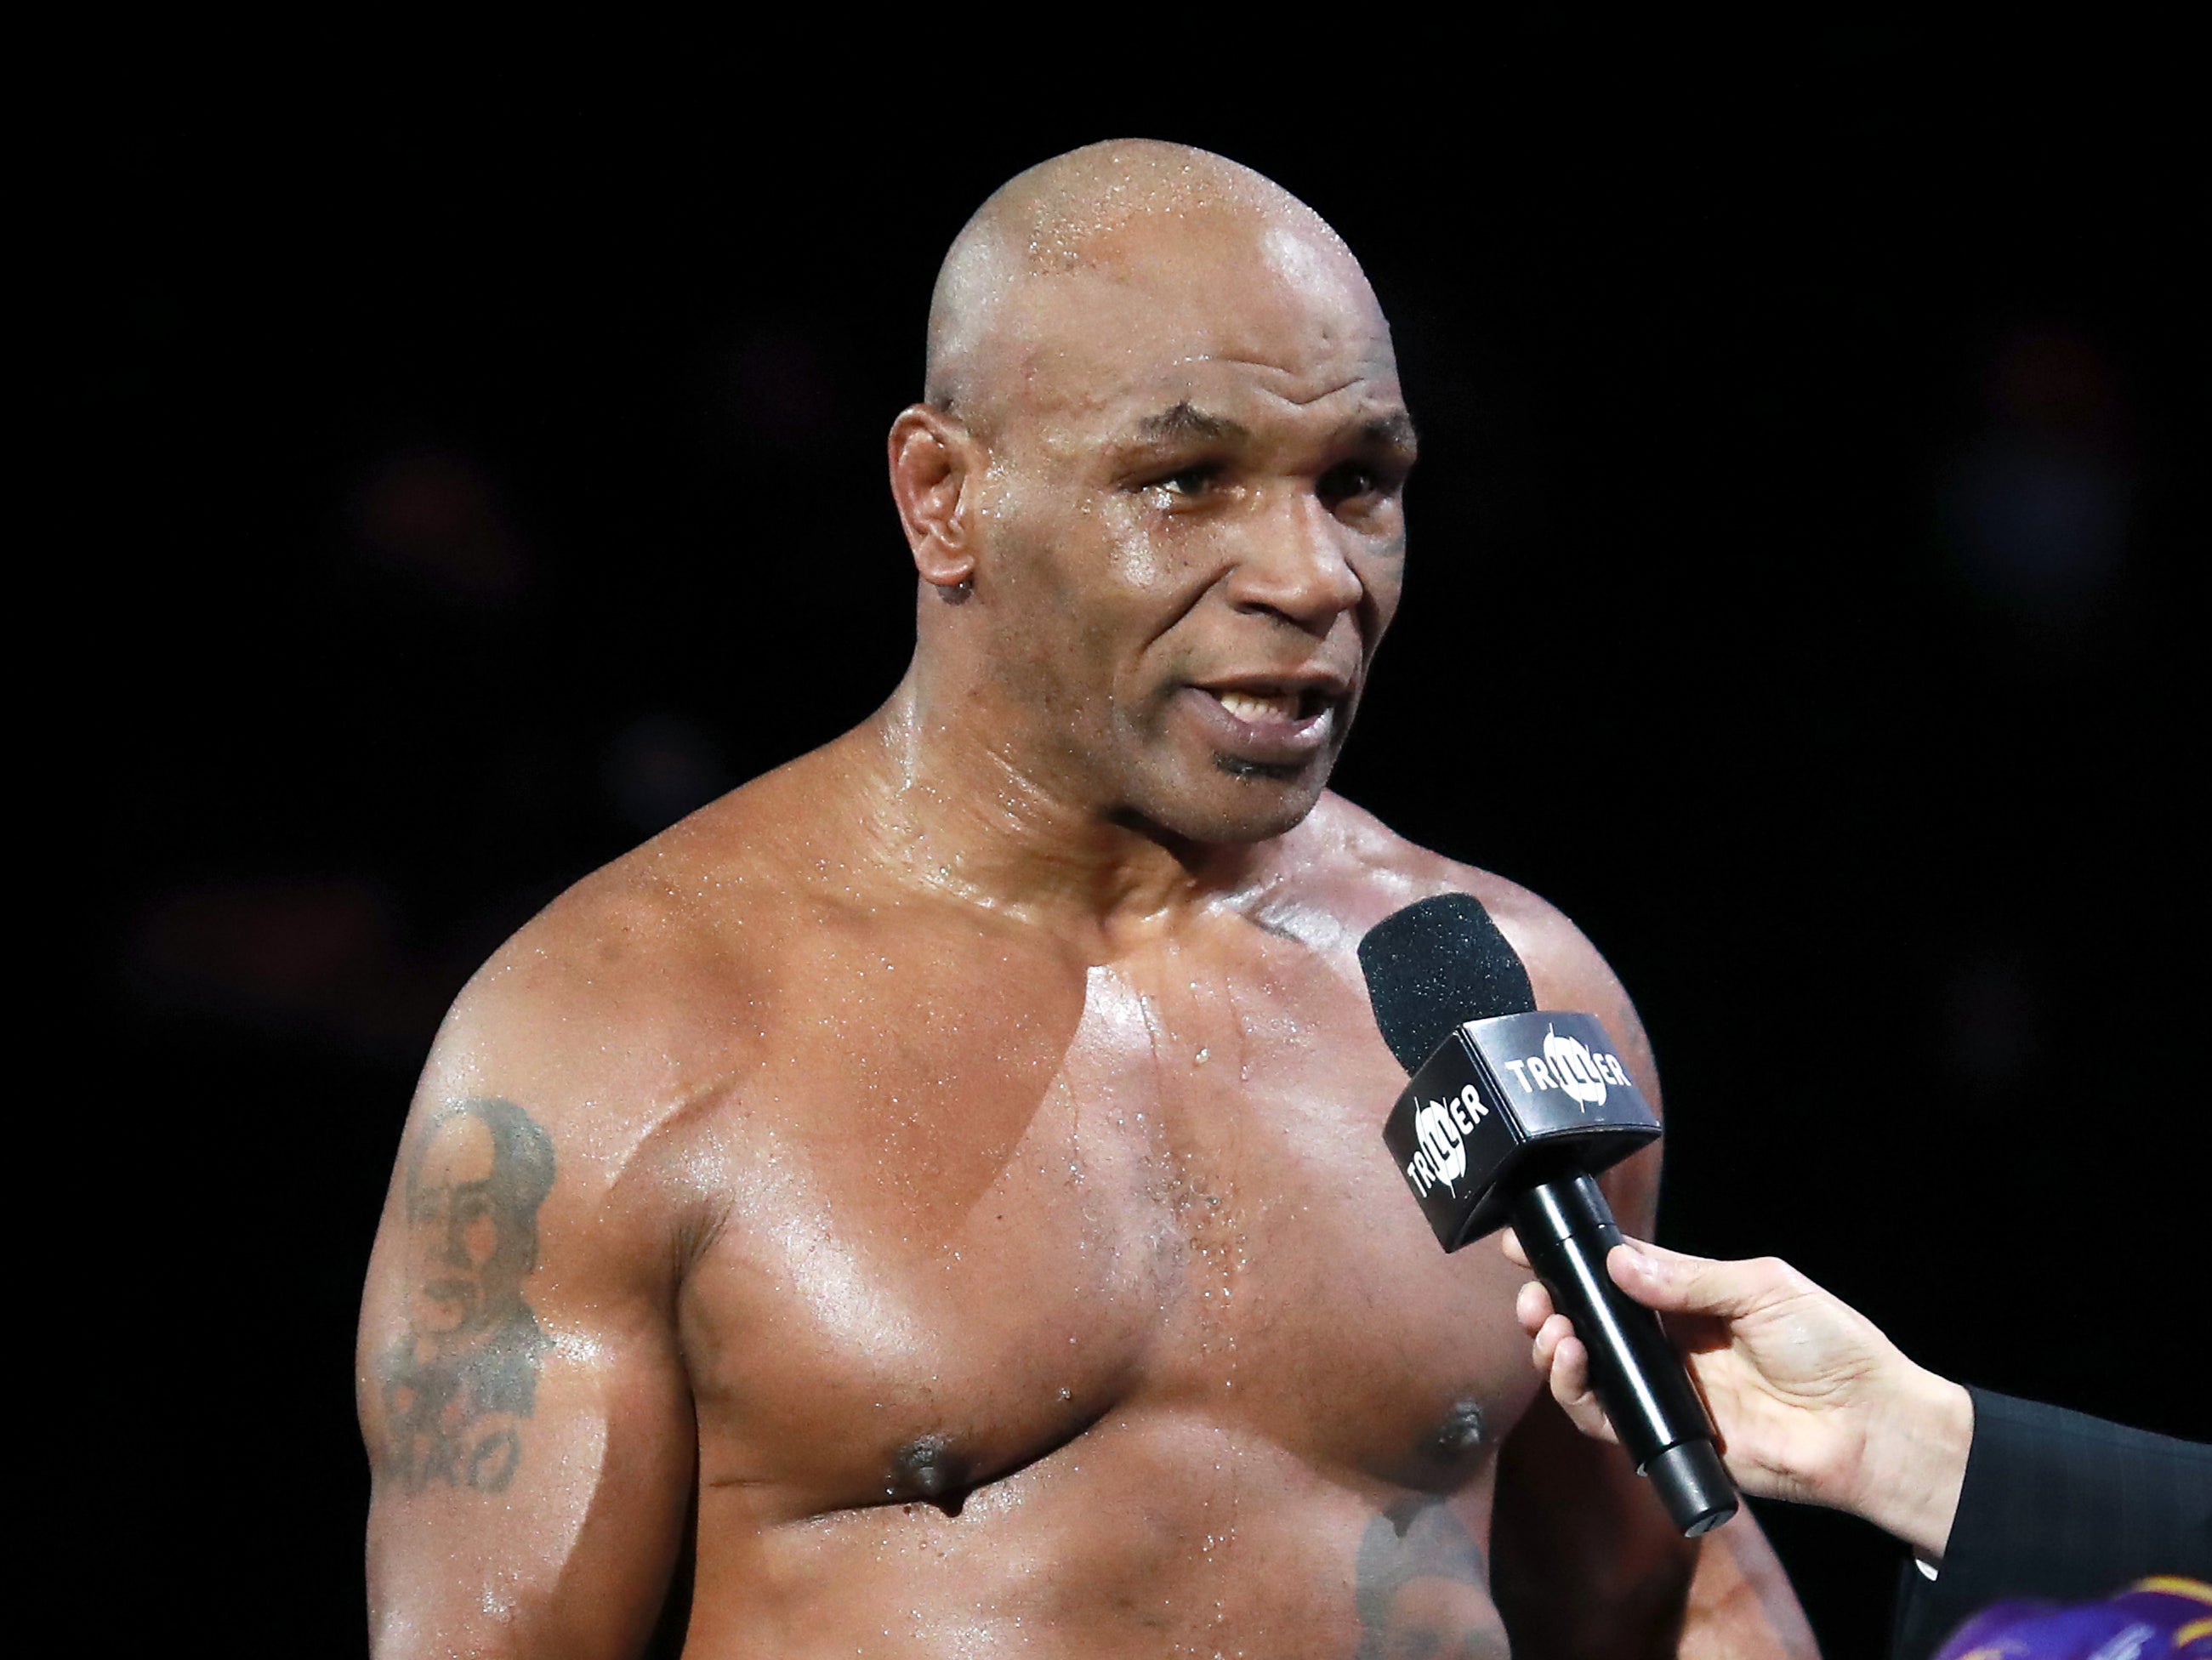 ‘I’m not going to be Fat Mike anymore’: Mike Tyson vows to stay in